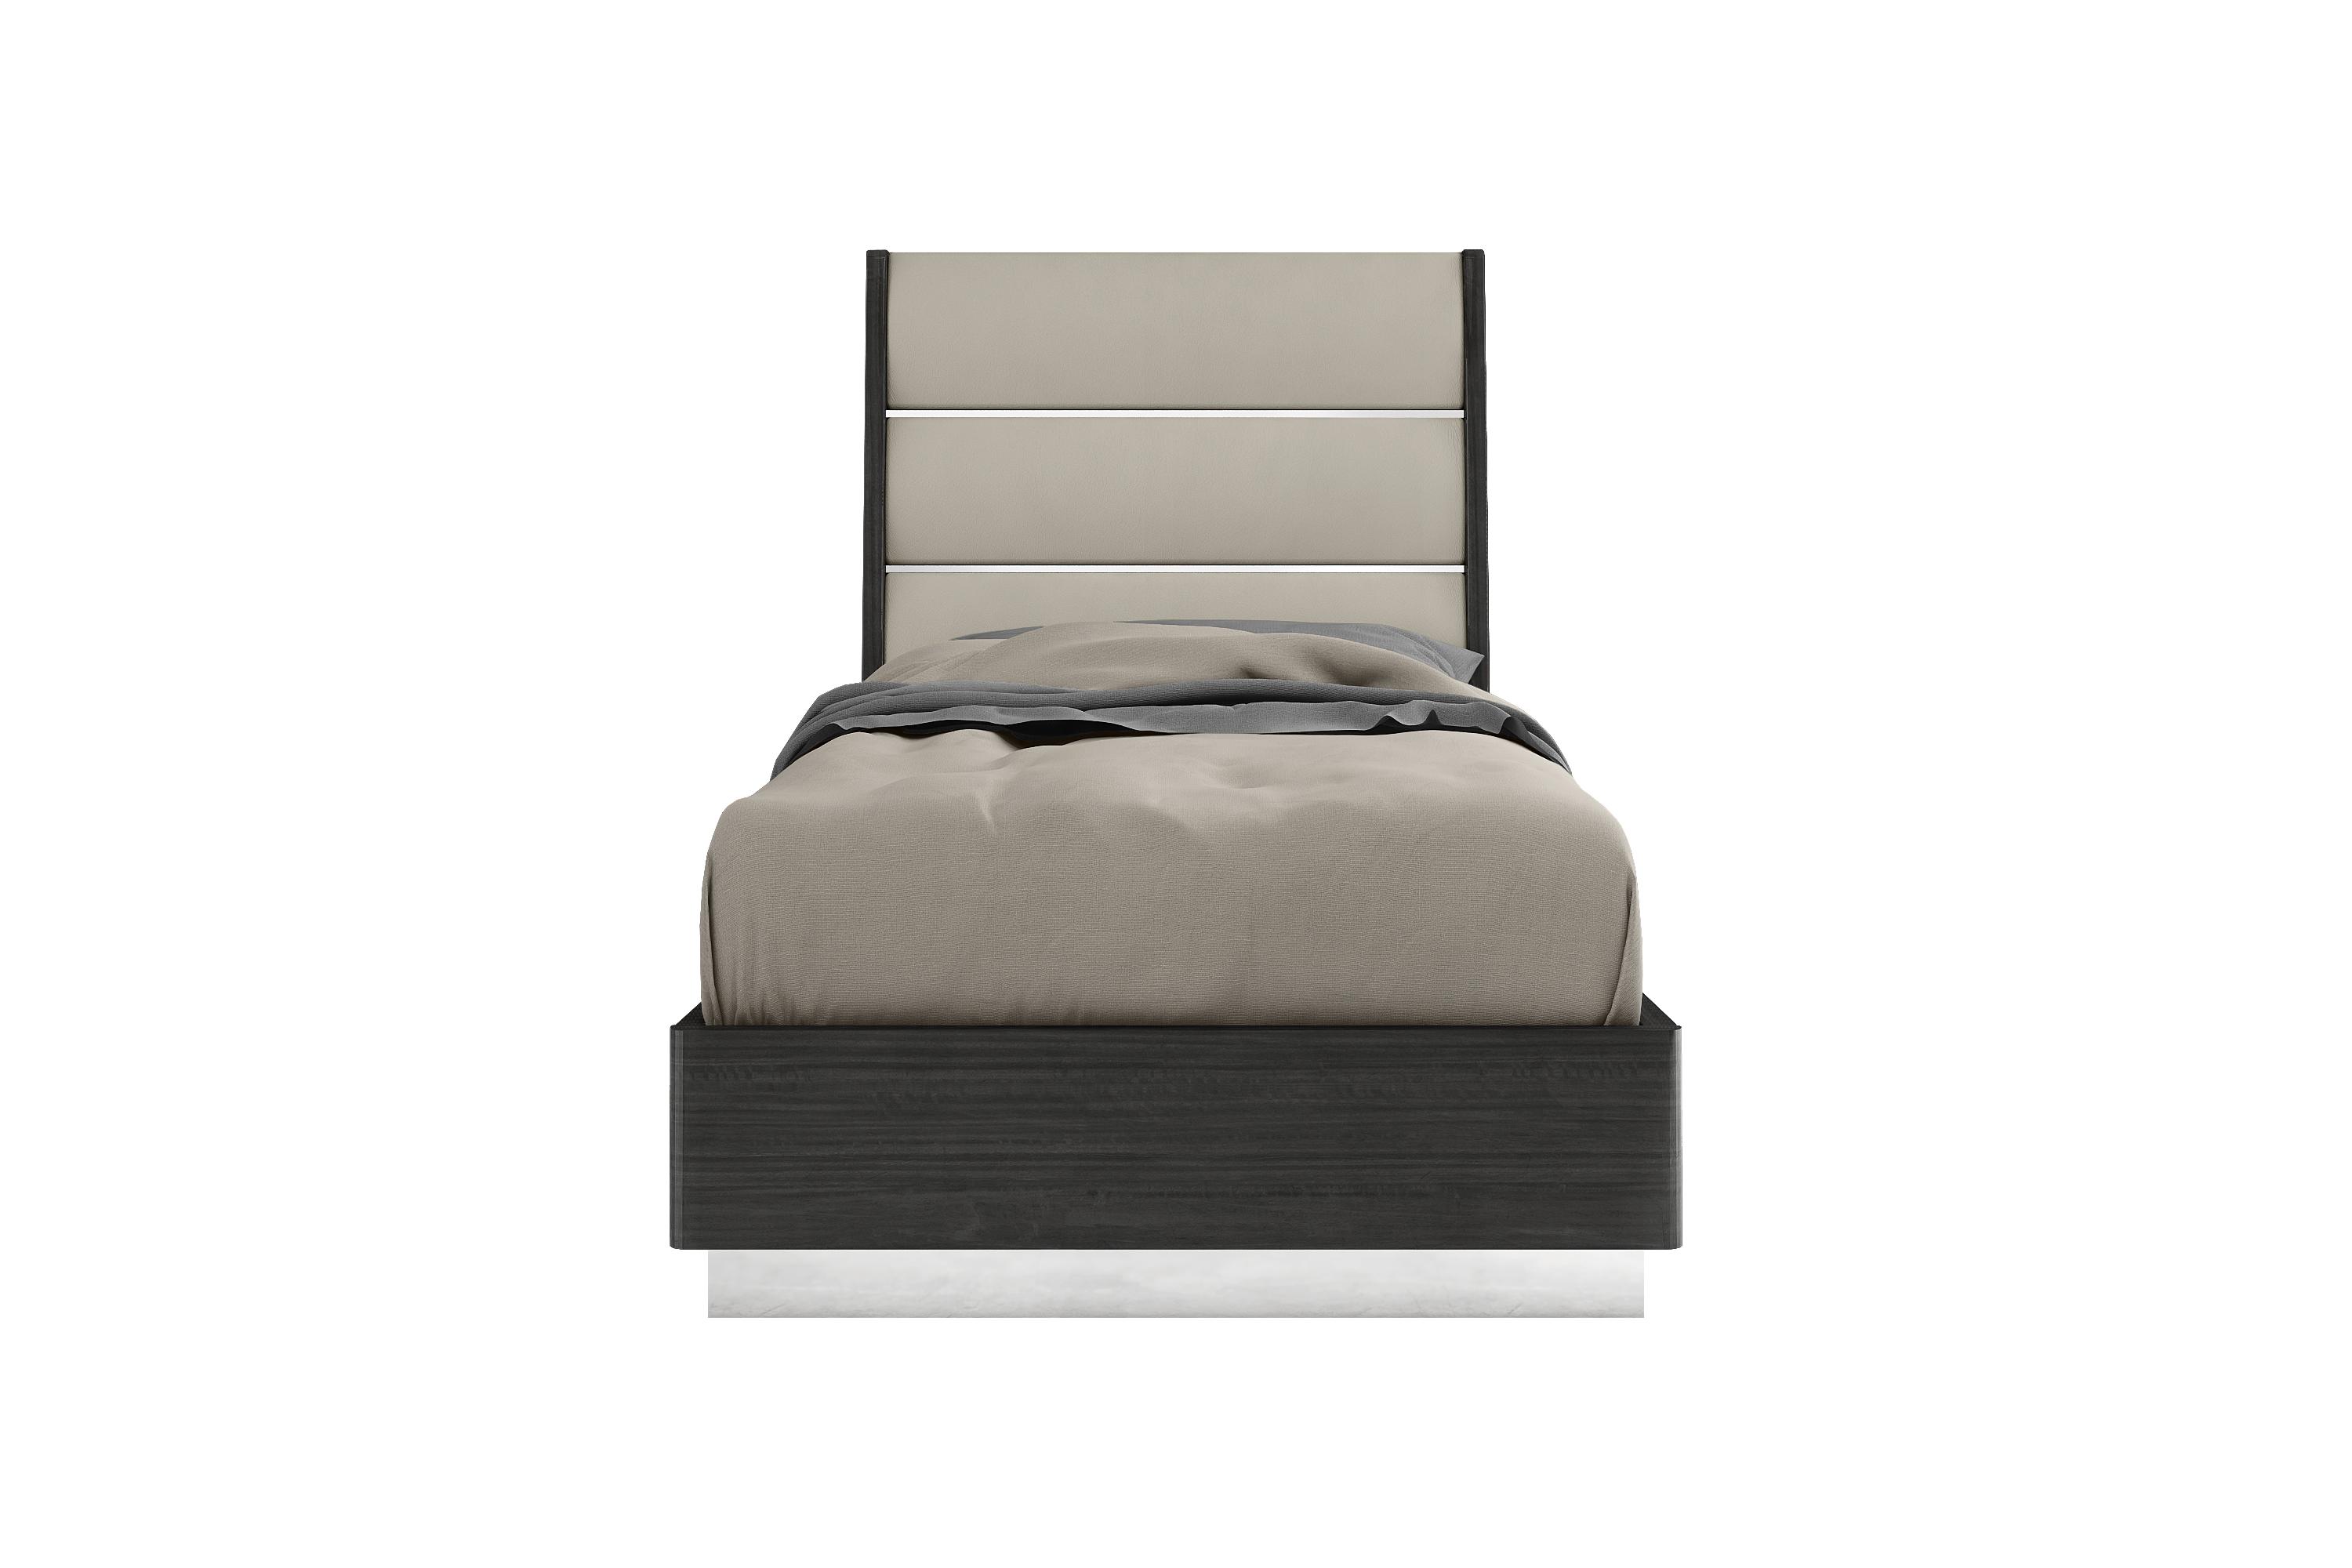 Contemporary Bed BT1752-DGRY/LGRY Pino BT1752-DGRY/LGRY in Dark Gray Faux Leather